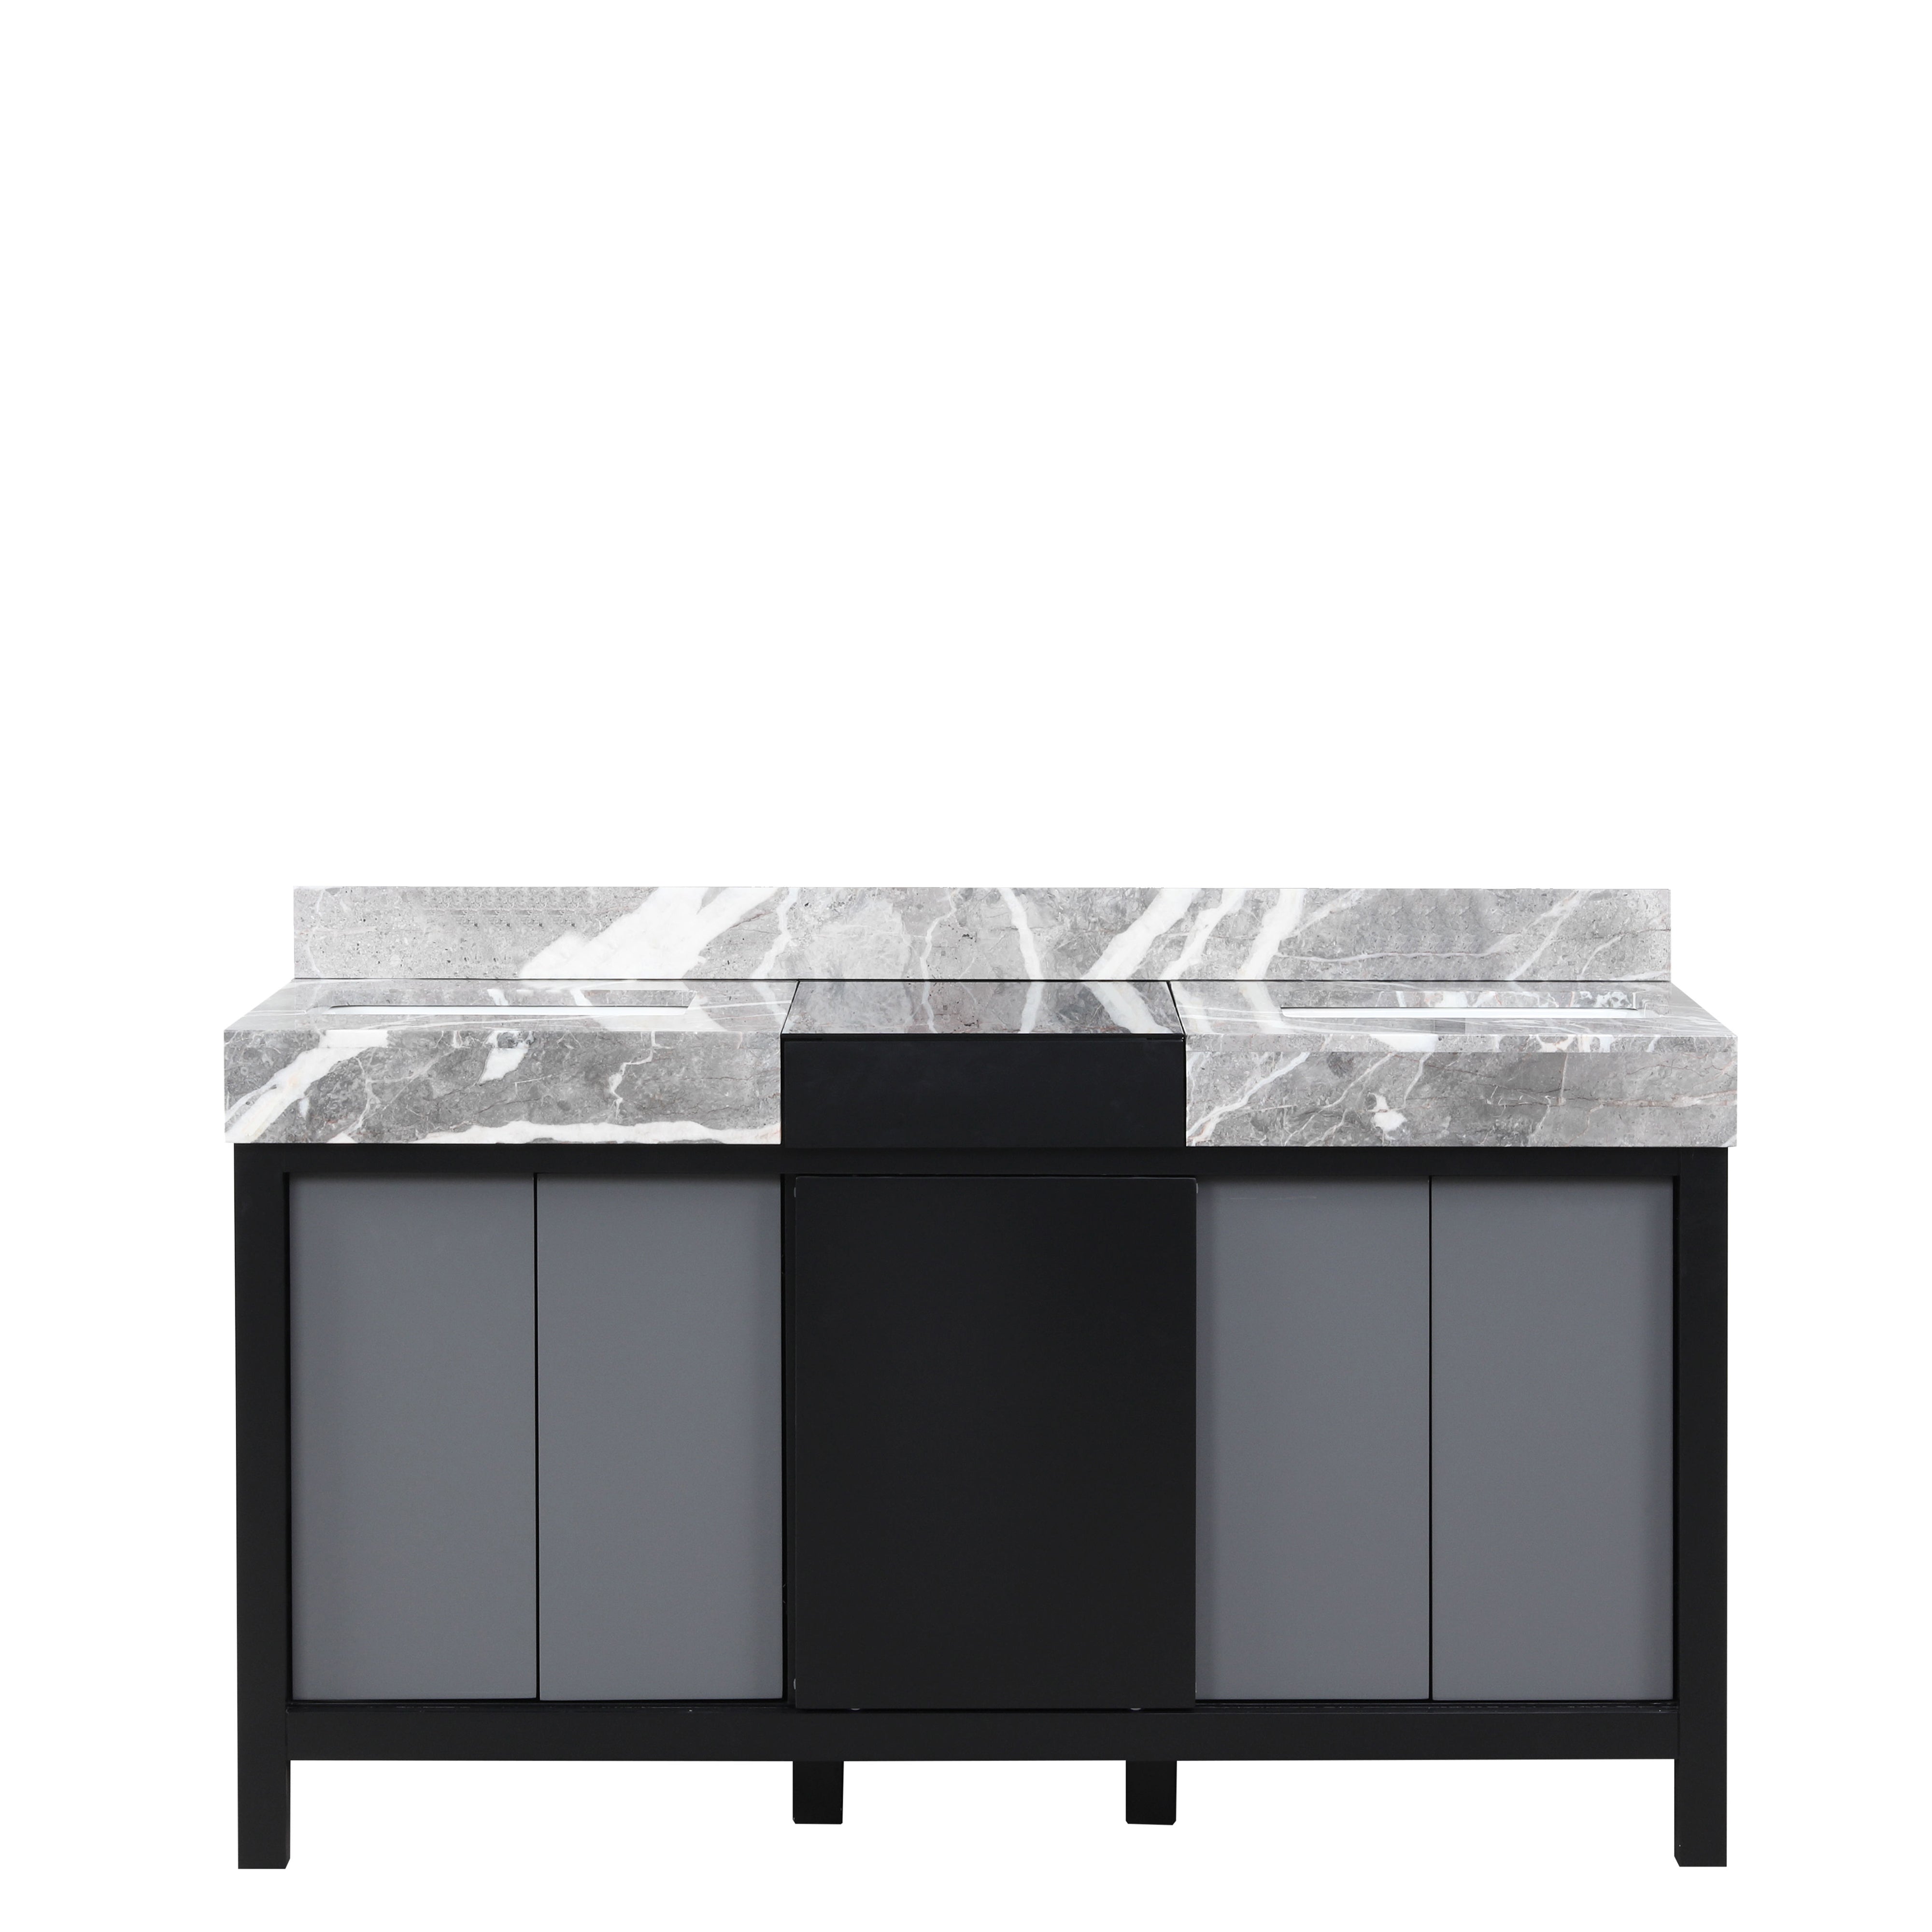 Lexora Zilara LZ342260DLIS000 60" Double Bathroom Vanity in Black and Grey with Castle Grey Marble, White Rectangle Sinks, Front View